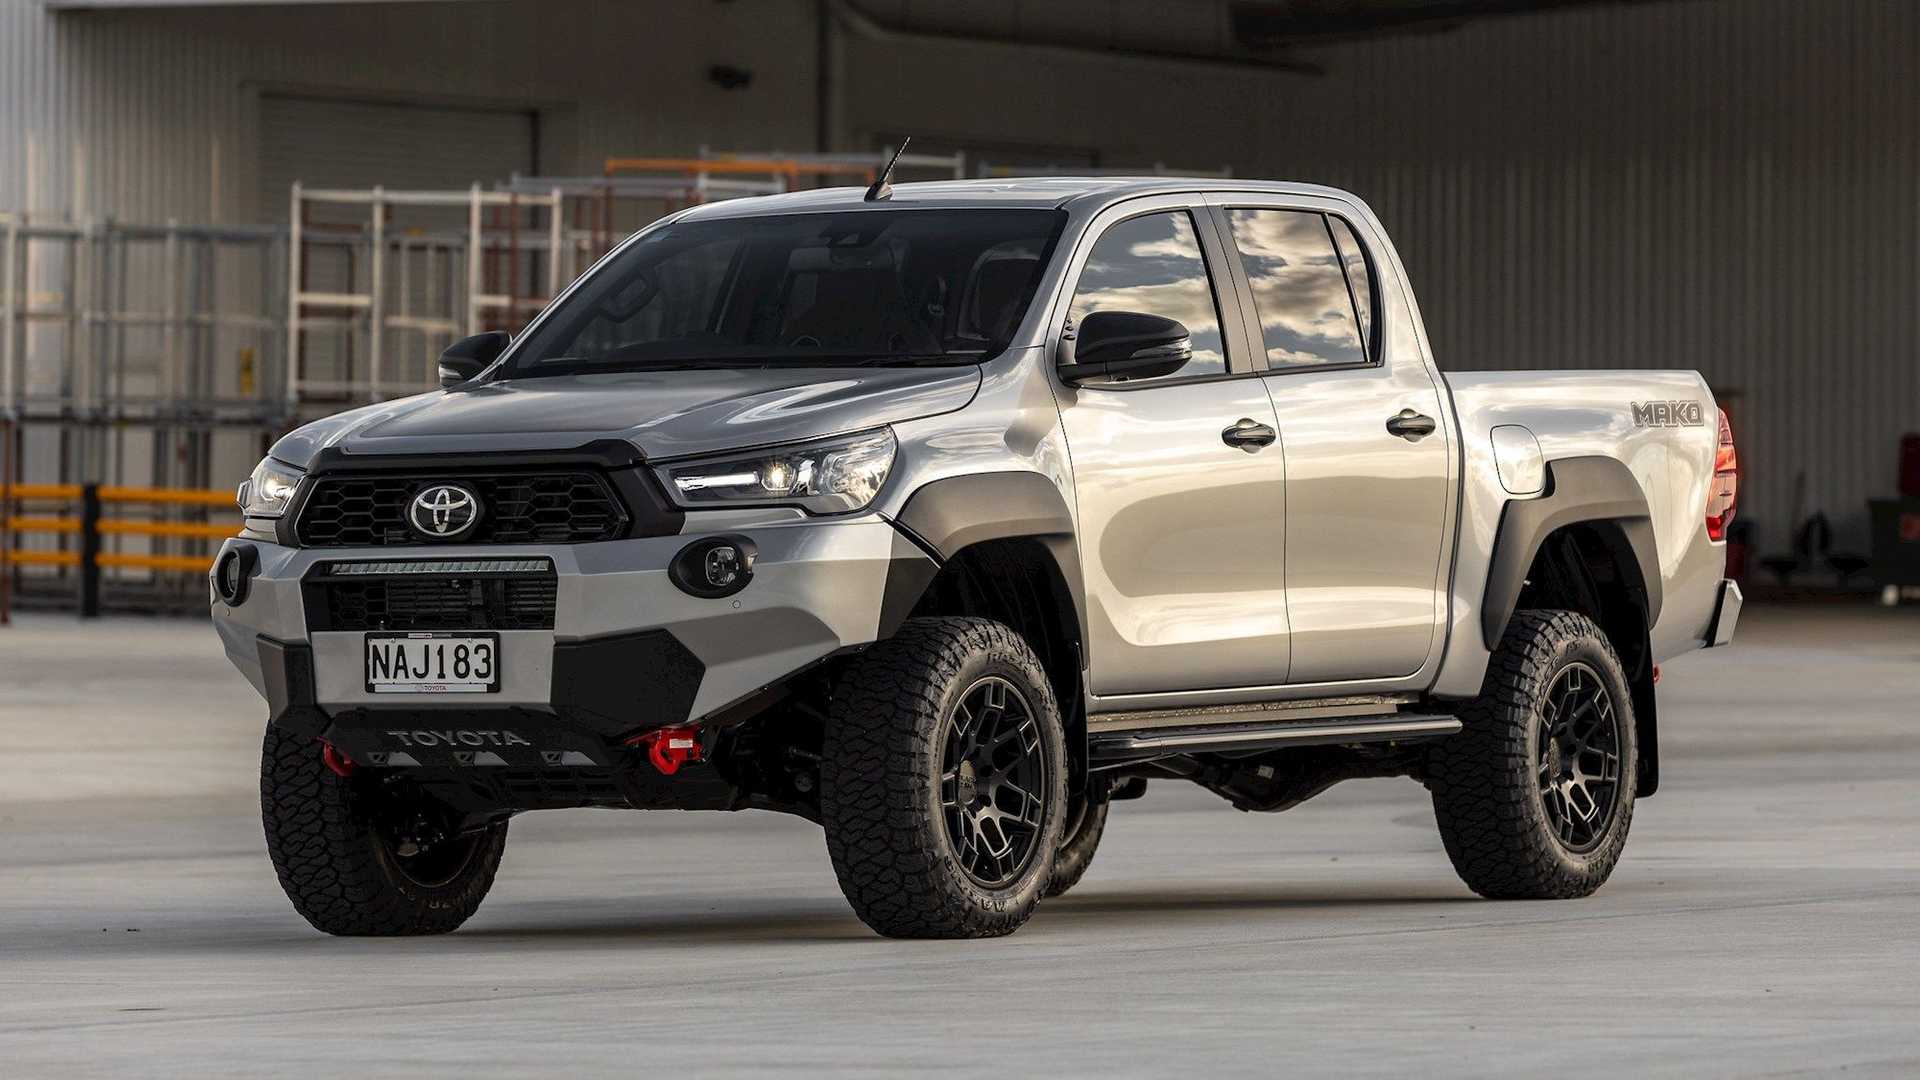 2021 Toyota Hilux: Everyone's Favorite International Truck Gets Some  Serious Upgrades